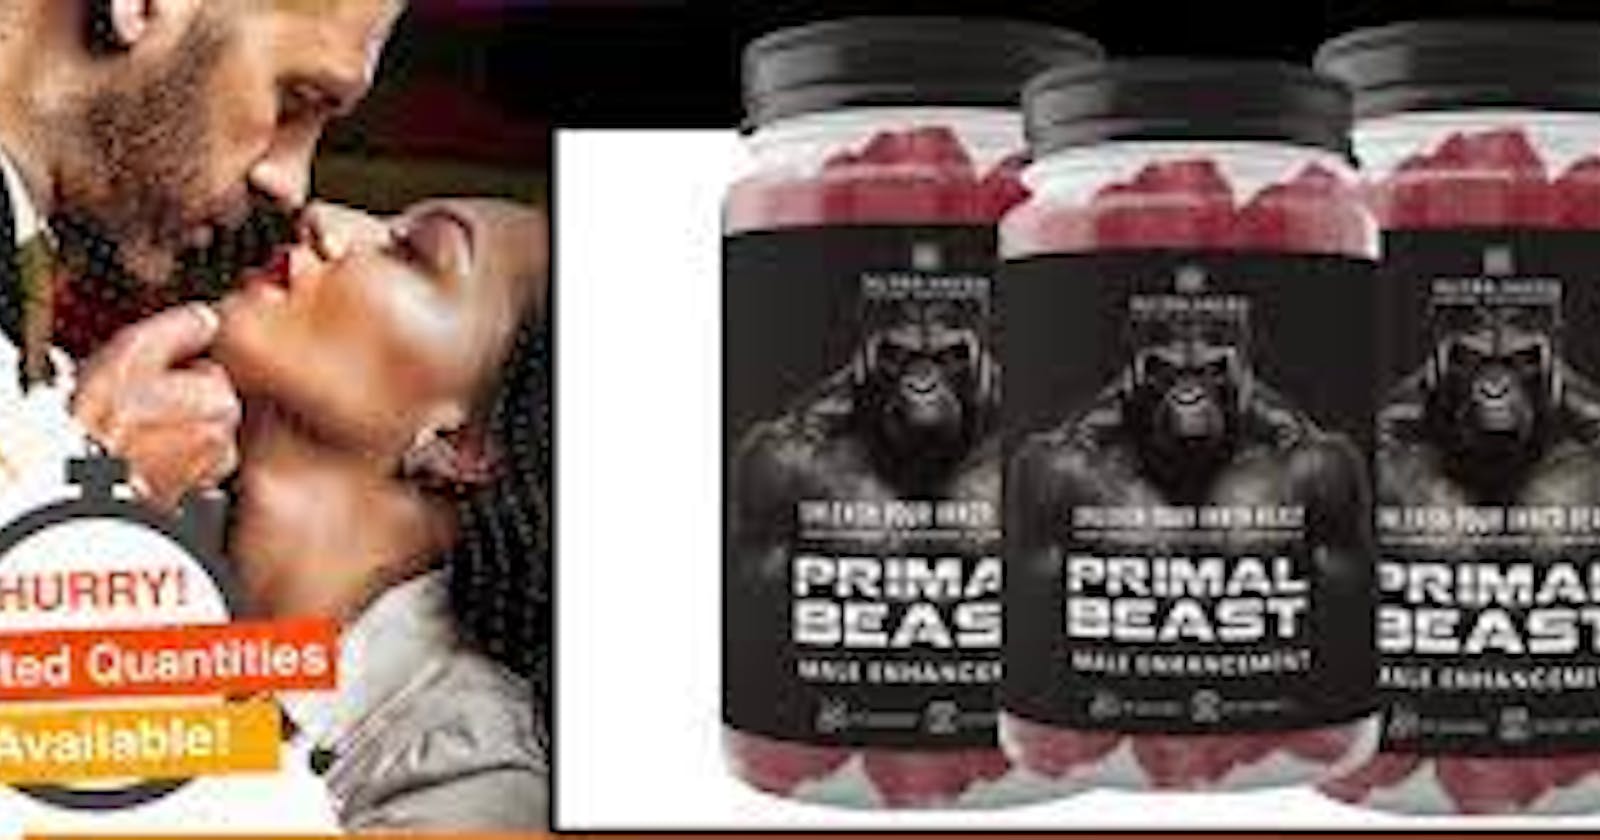 Primal Beast Male Enhancement Review 2023